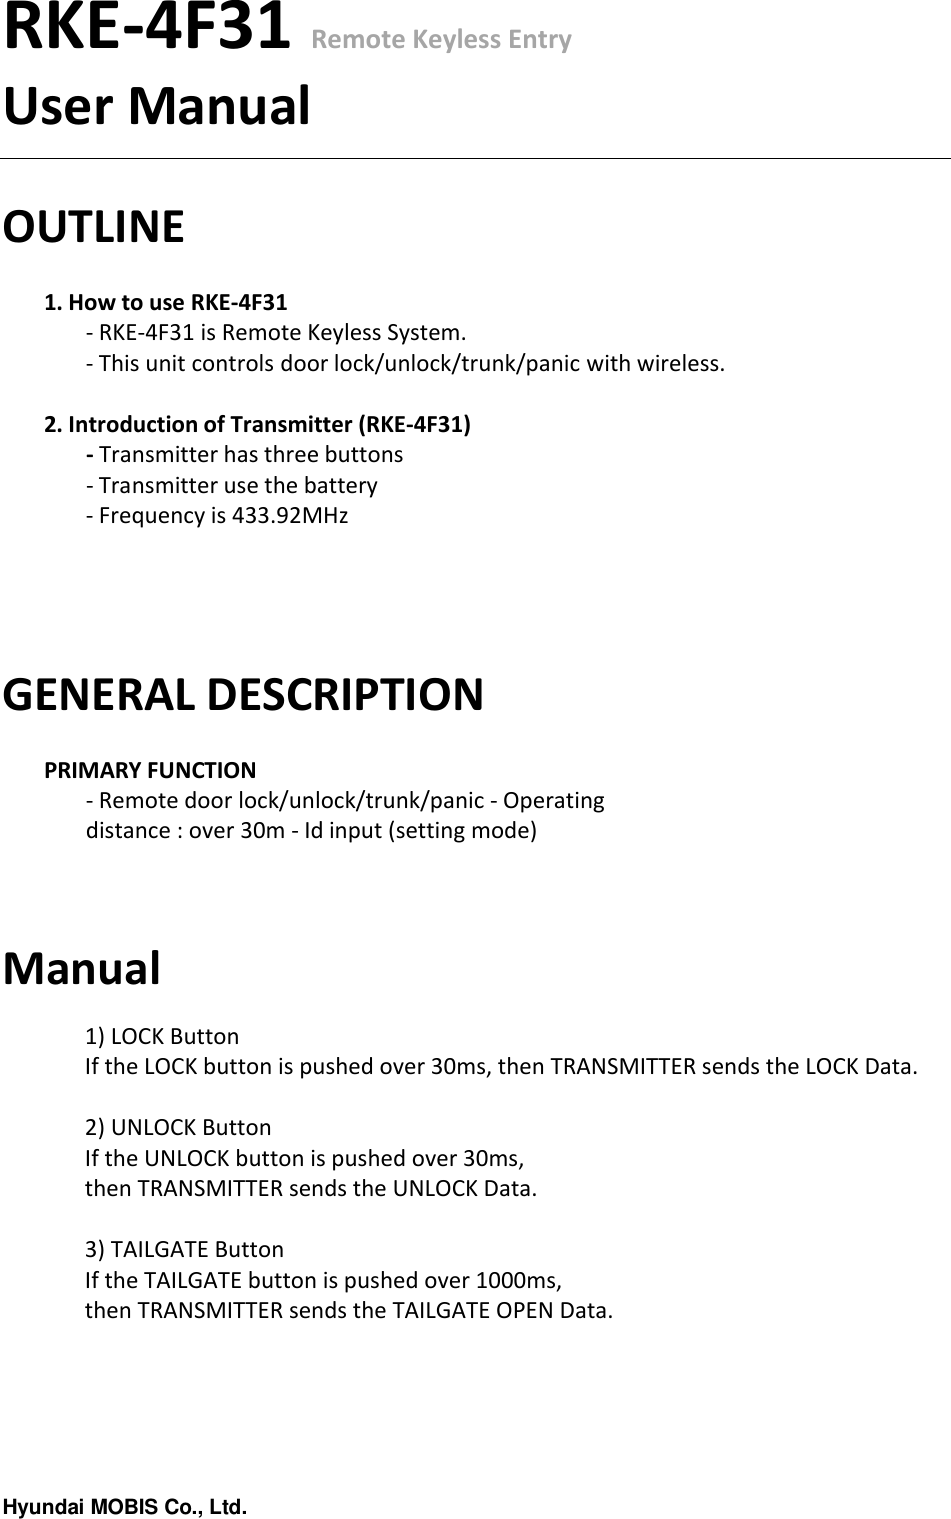 Hyundai MOBIS Co., Ltd.RKE-4F31 Remote Keyless EntryUser ManualOUTLINE1. How to use RKE-4F31- RKE-4F31 is Remote Keyless System.- This unit controls door lock/unlock/trunk/panic with wireless.2. Introduction of Transmitter (RKE-4F31)- Transmitter has three buttons- Transmitter use the battery- Frequency is 433.92MHzGENERAL DESCRIPTIONPRIMARY FUNCTION- Remote door lock/unlock/trunk/panic - Operating distance : over 30m - Id input (setting mode)Manual1) LOCK ButtonIf the LOCK button is pushed over 30ms, then TRANSMITTER sends the LOCK Data.2) UNLOCK ButtonIf the UNLOCK button is pushed over 30ms, then TRANSMITTER sends the UNLOCK Data.3) TAILGATE ButtonIf the TAILGATE button is pushed over 1000ms, then TRANSMITTER sends the TAILGATE OPEN Data.